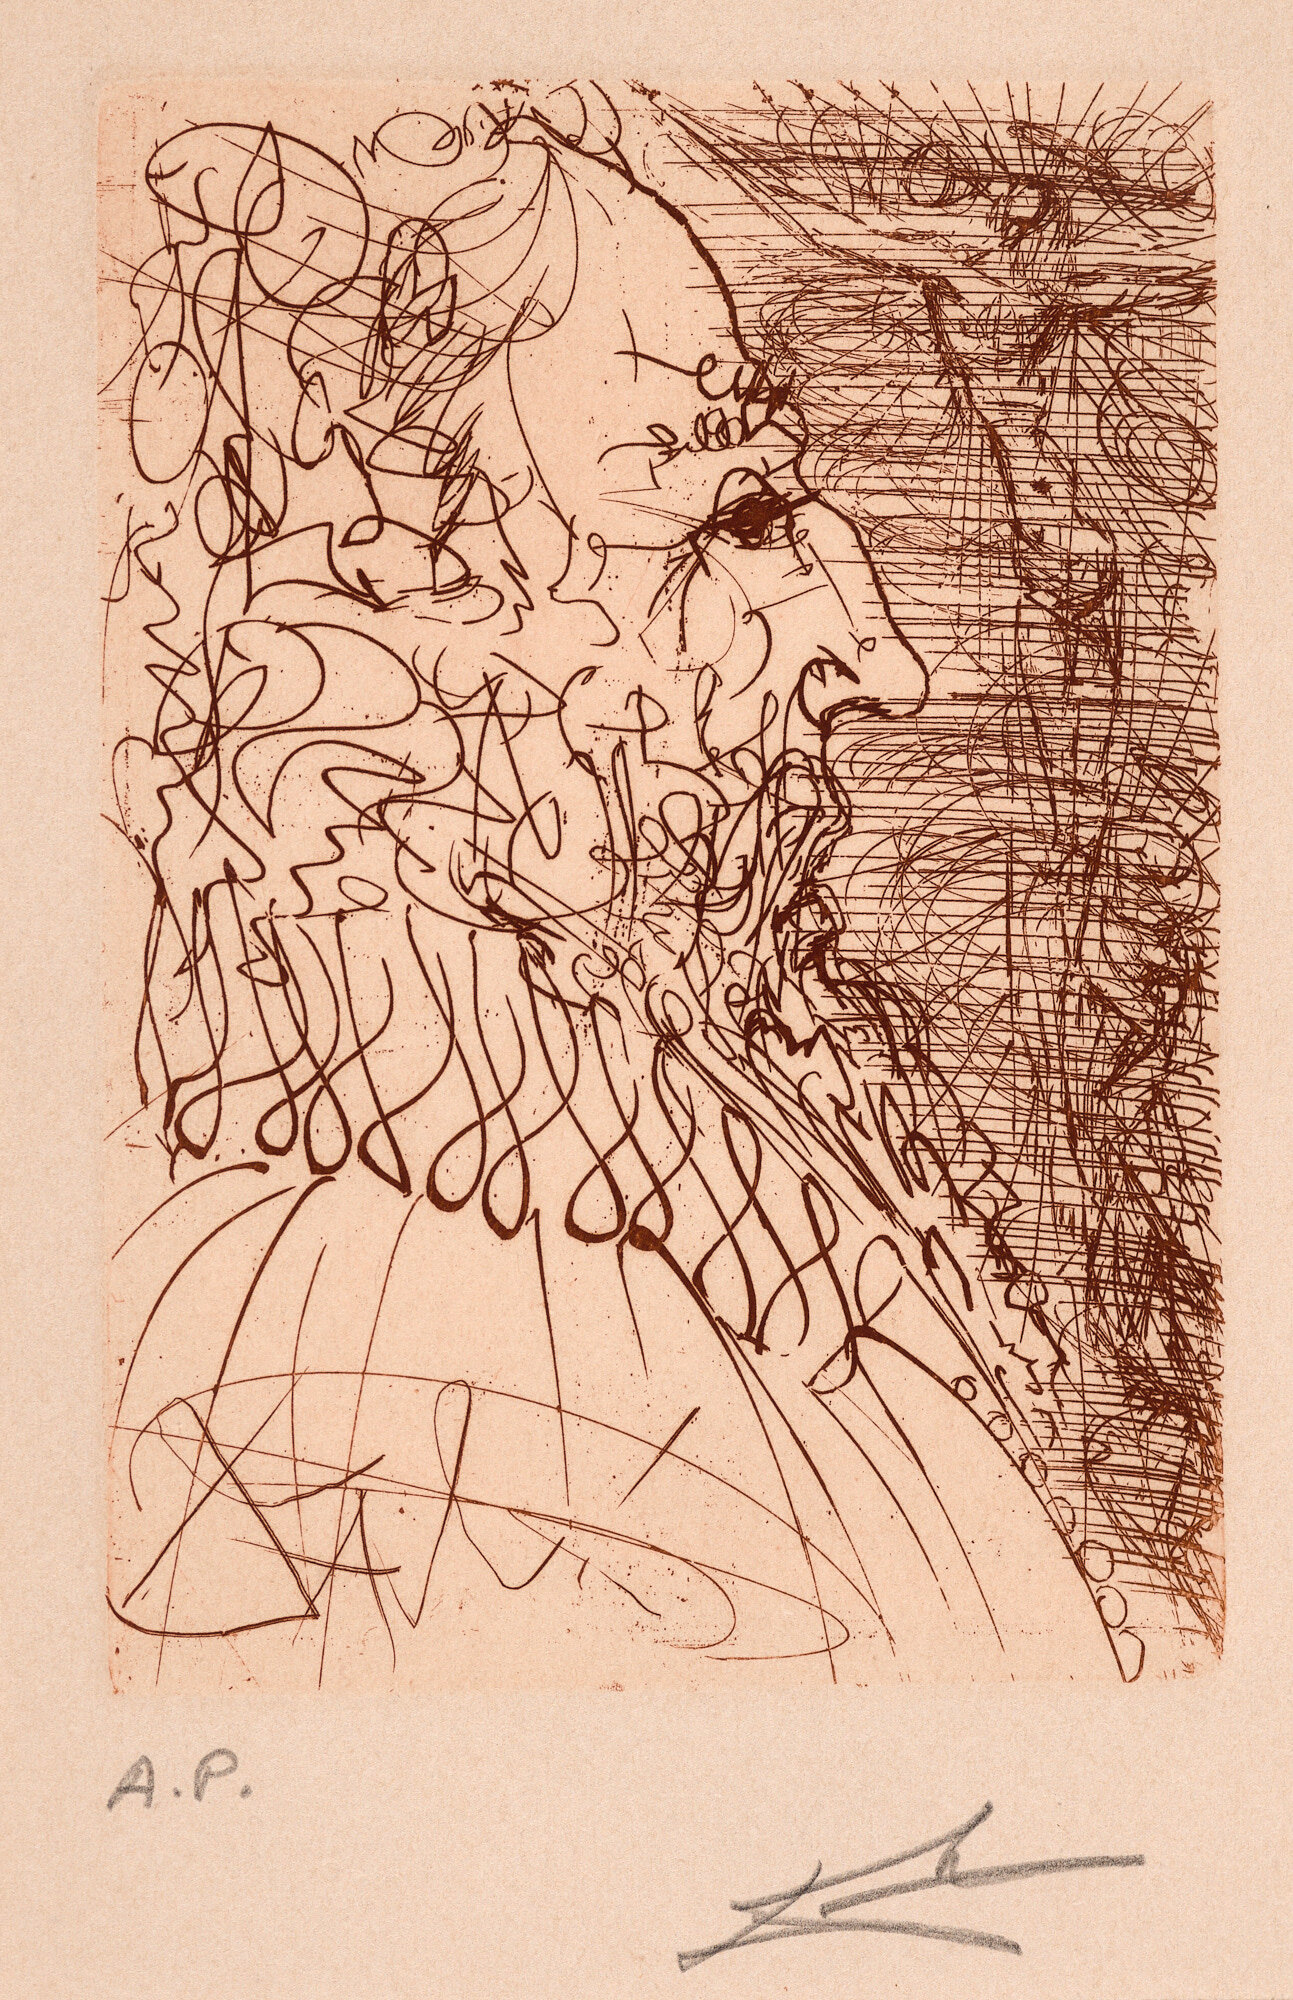  Salvador Dalí (1904-1989)   El Greco   Etching, A.P., Edition 25, 1965, 8 ¾” x 5 ¾”    Gift of Nick Dowen     